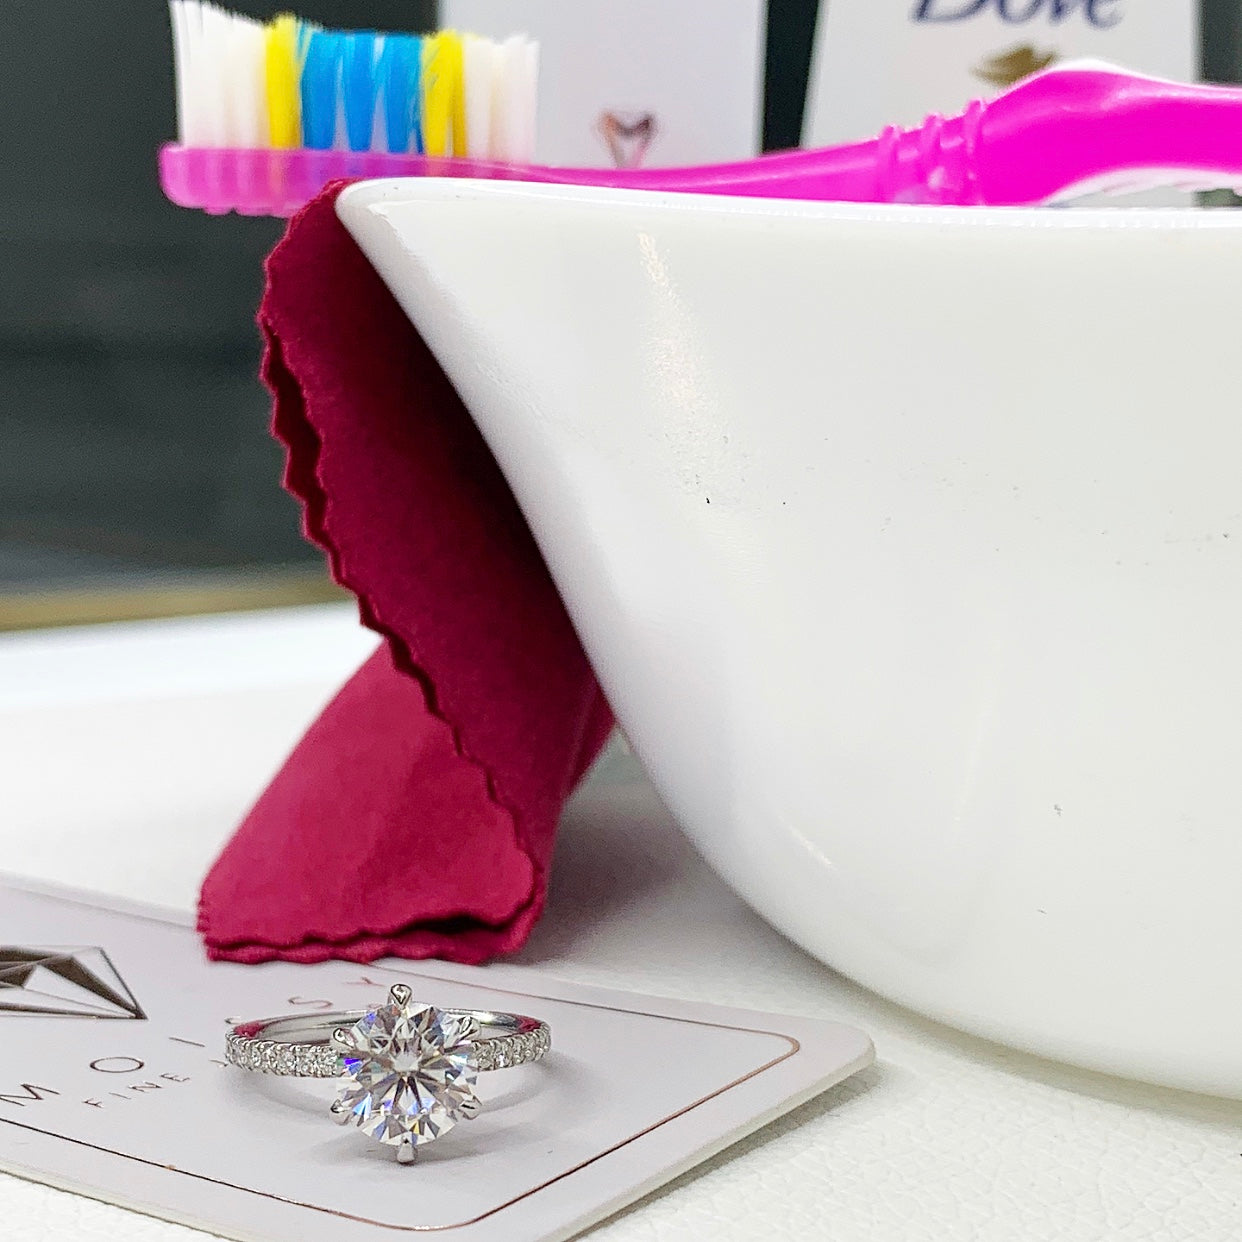 How Will My Moissanite Hold Up To Frequent Hand-washing And Sanitizing